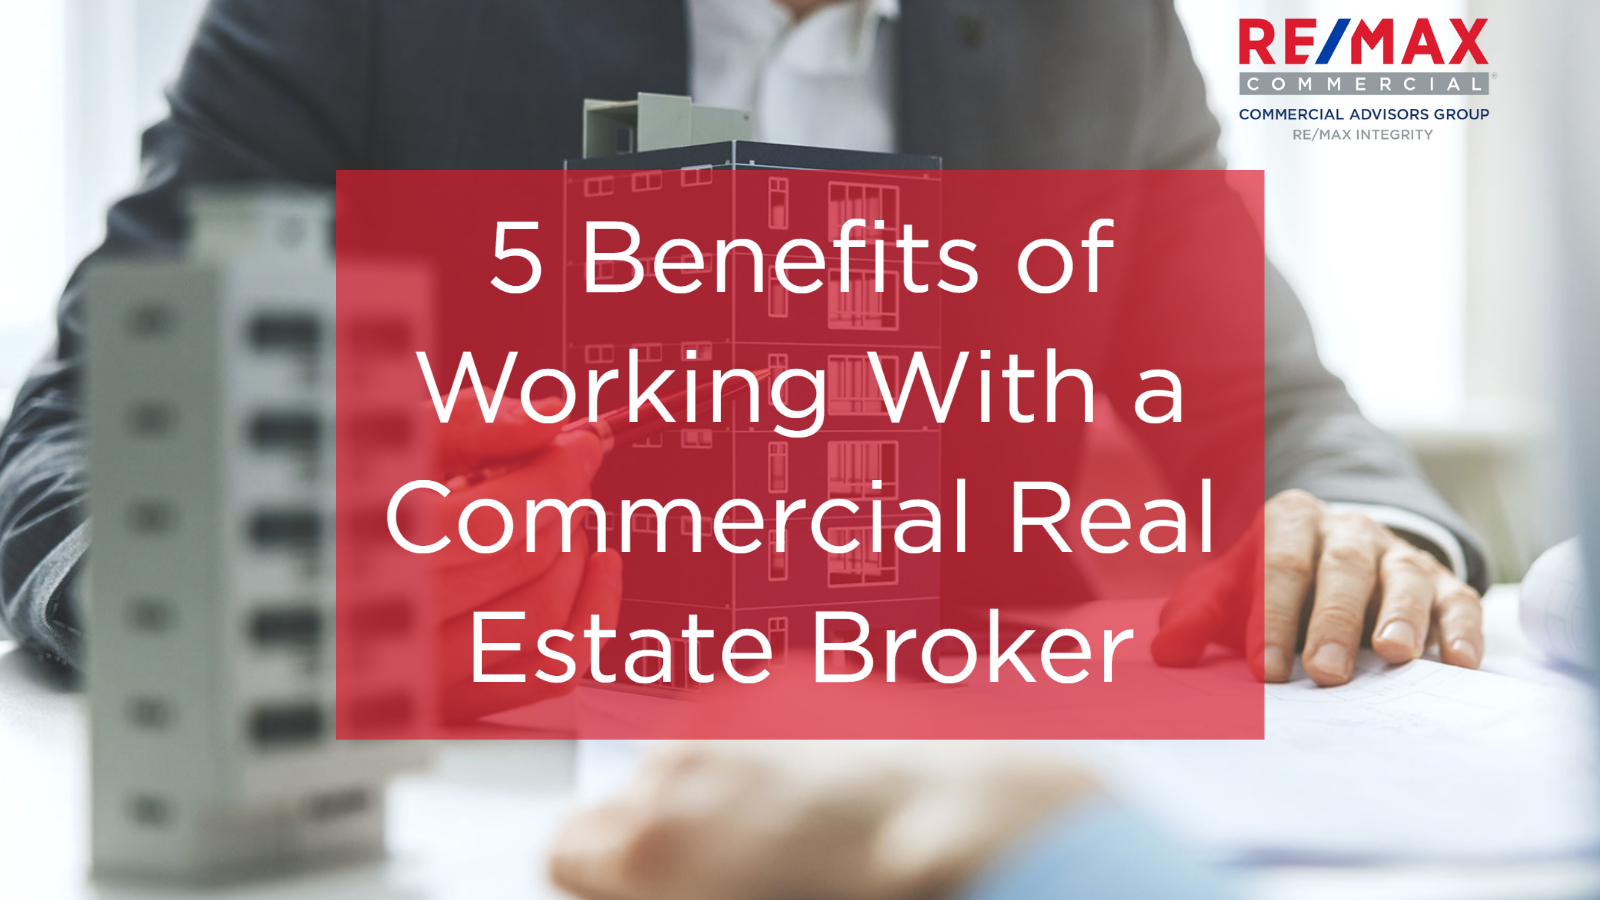 5 Benefits of Working With a Commercial Real Estate Broker